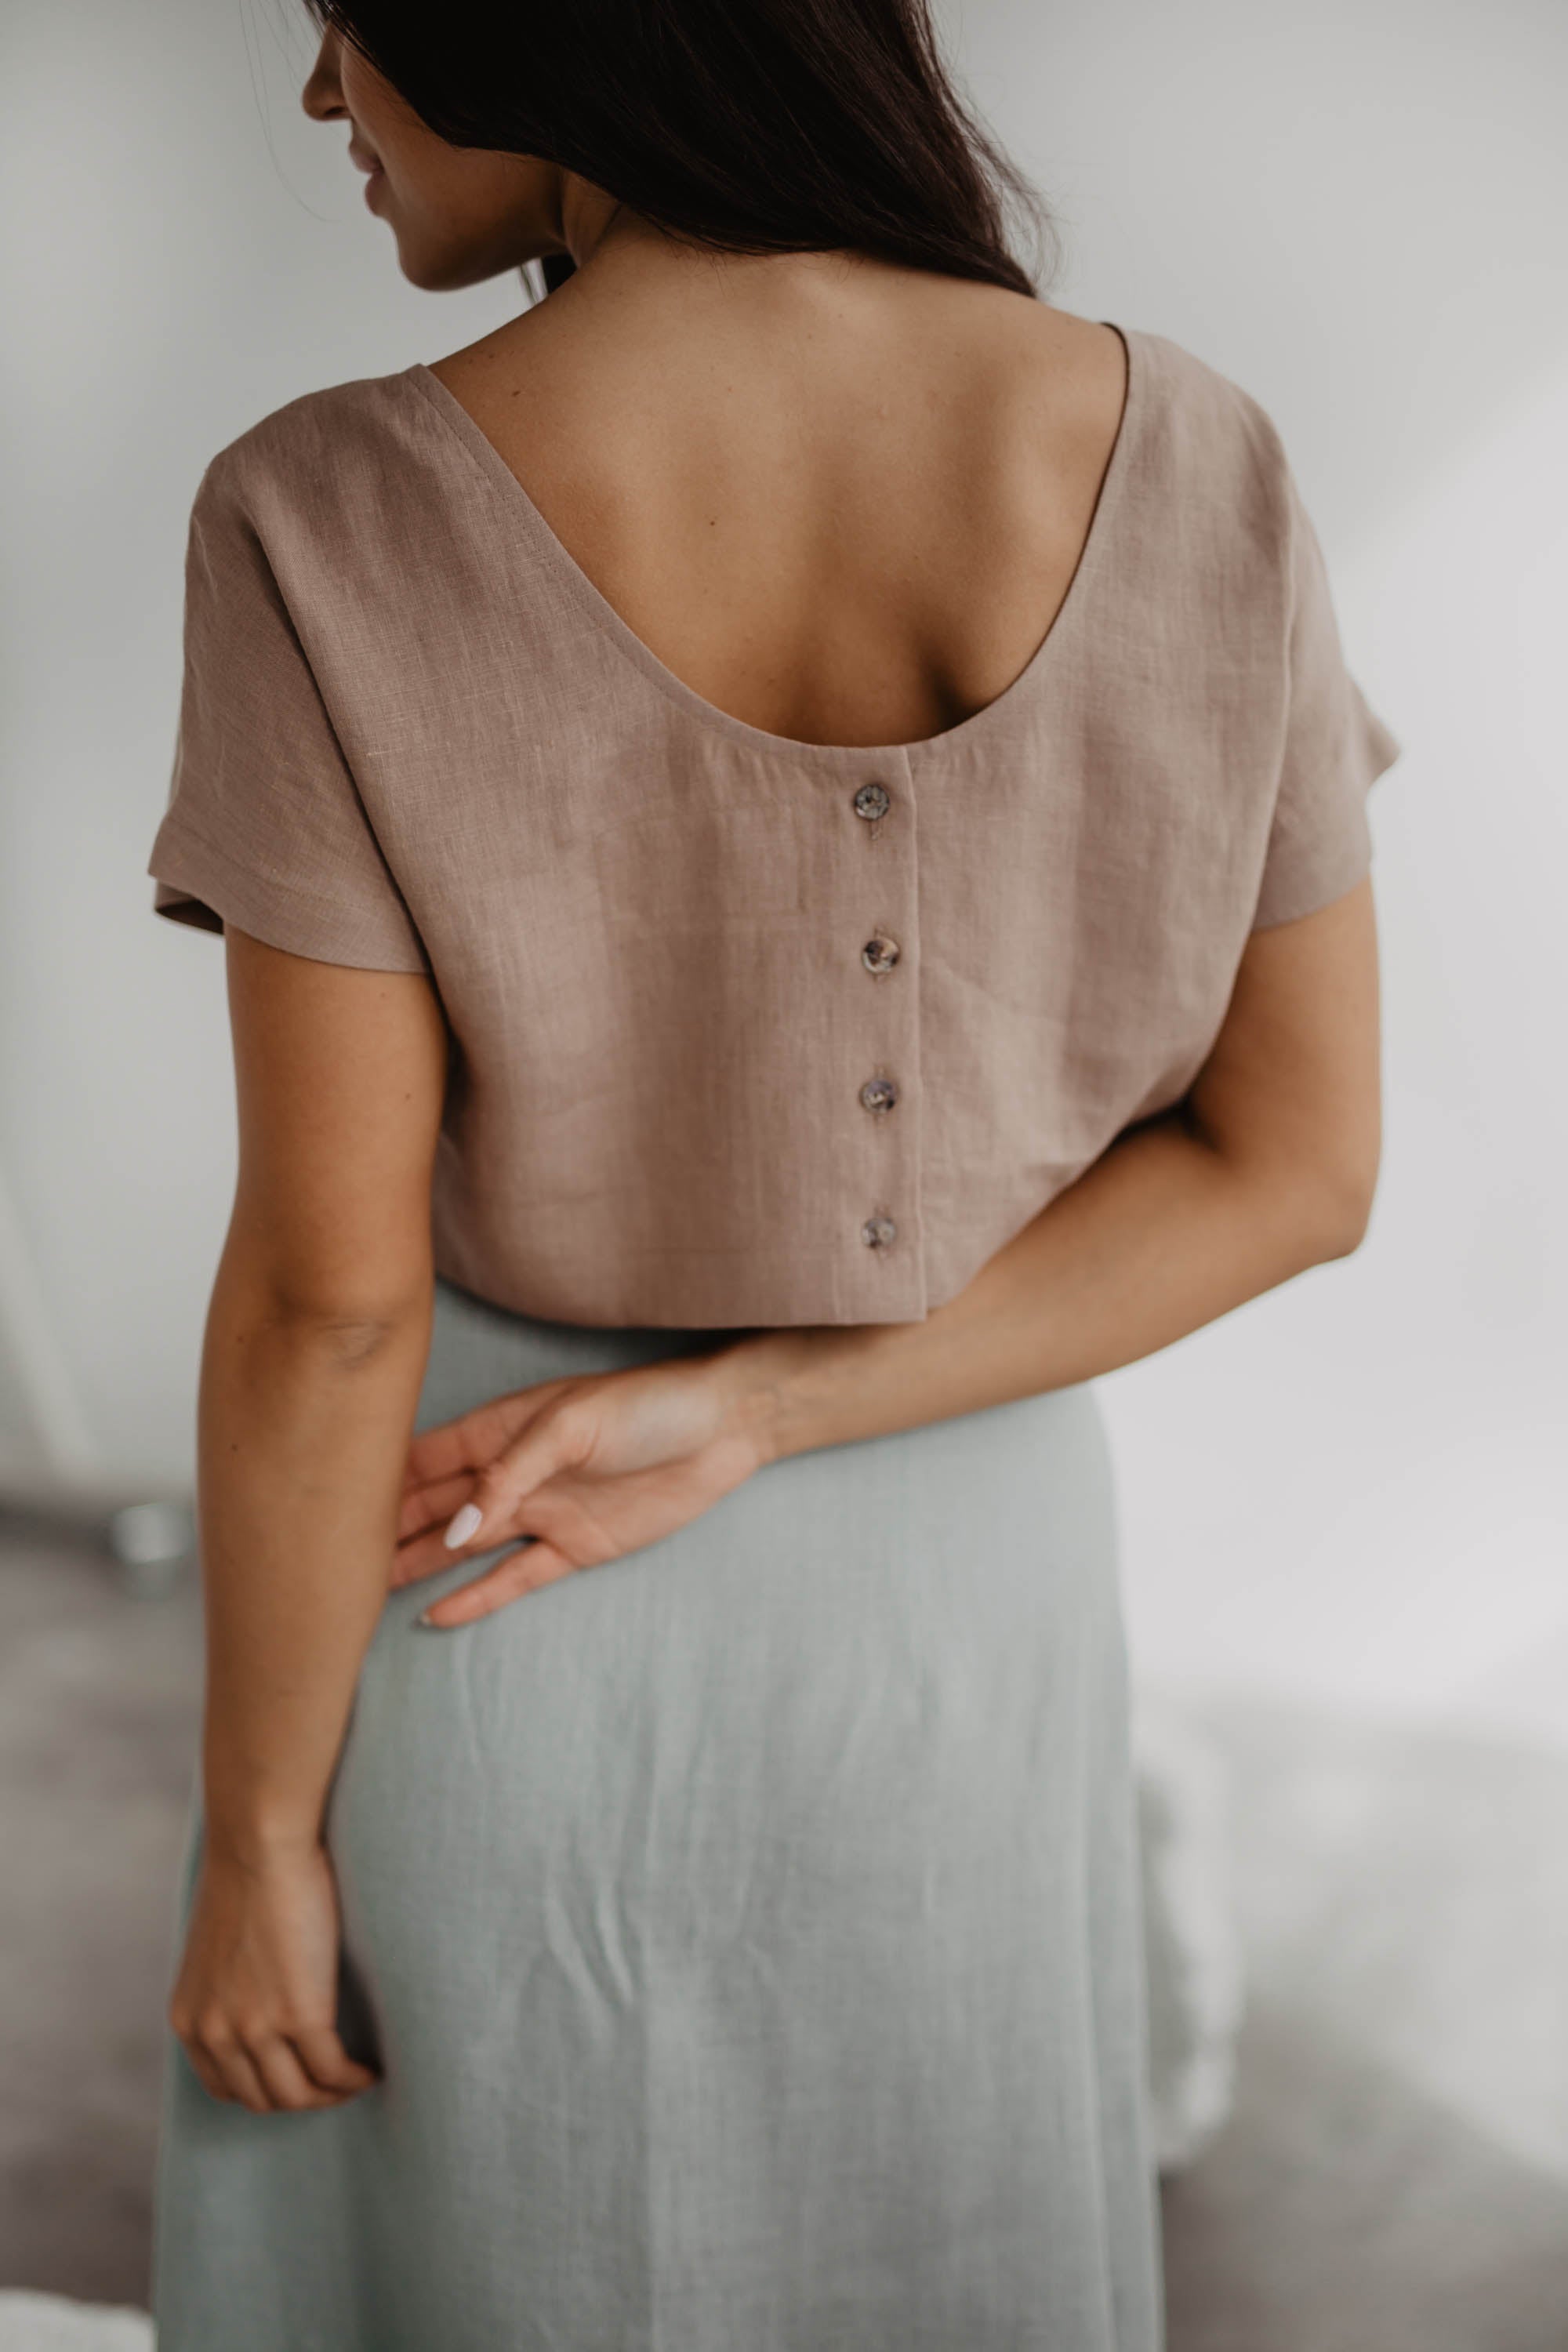 Back Of Woman Wearing A Dusty Rose Linen Crop Top With Buttons And Sage green Linen Skirt